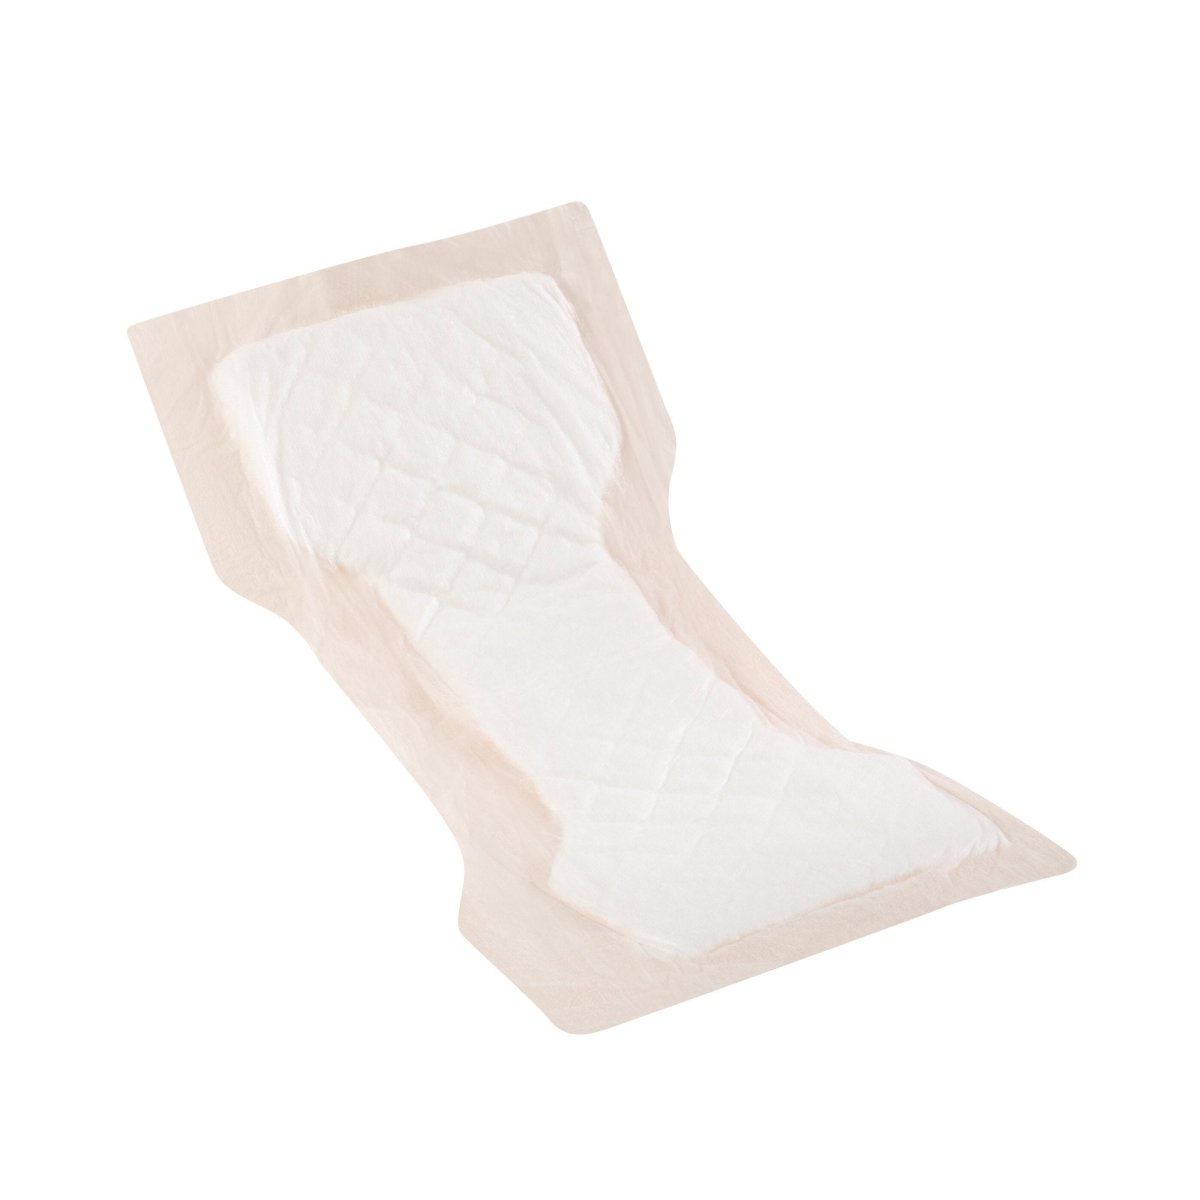 Dignity Incontinence Liners UltraShield - 661336_CS - 1